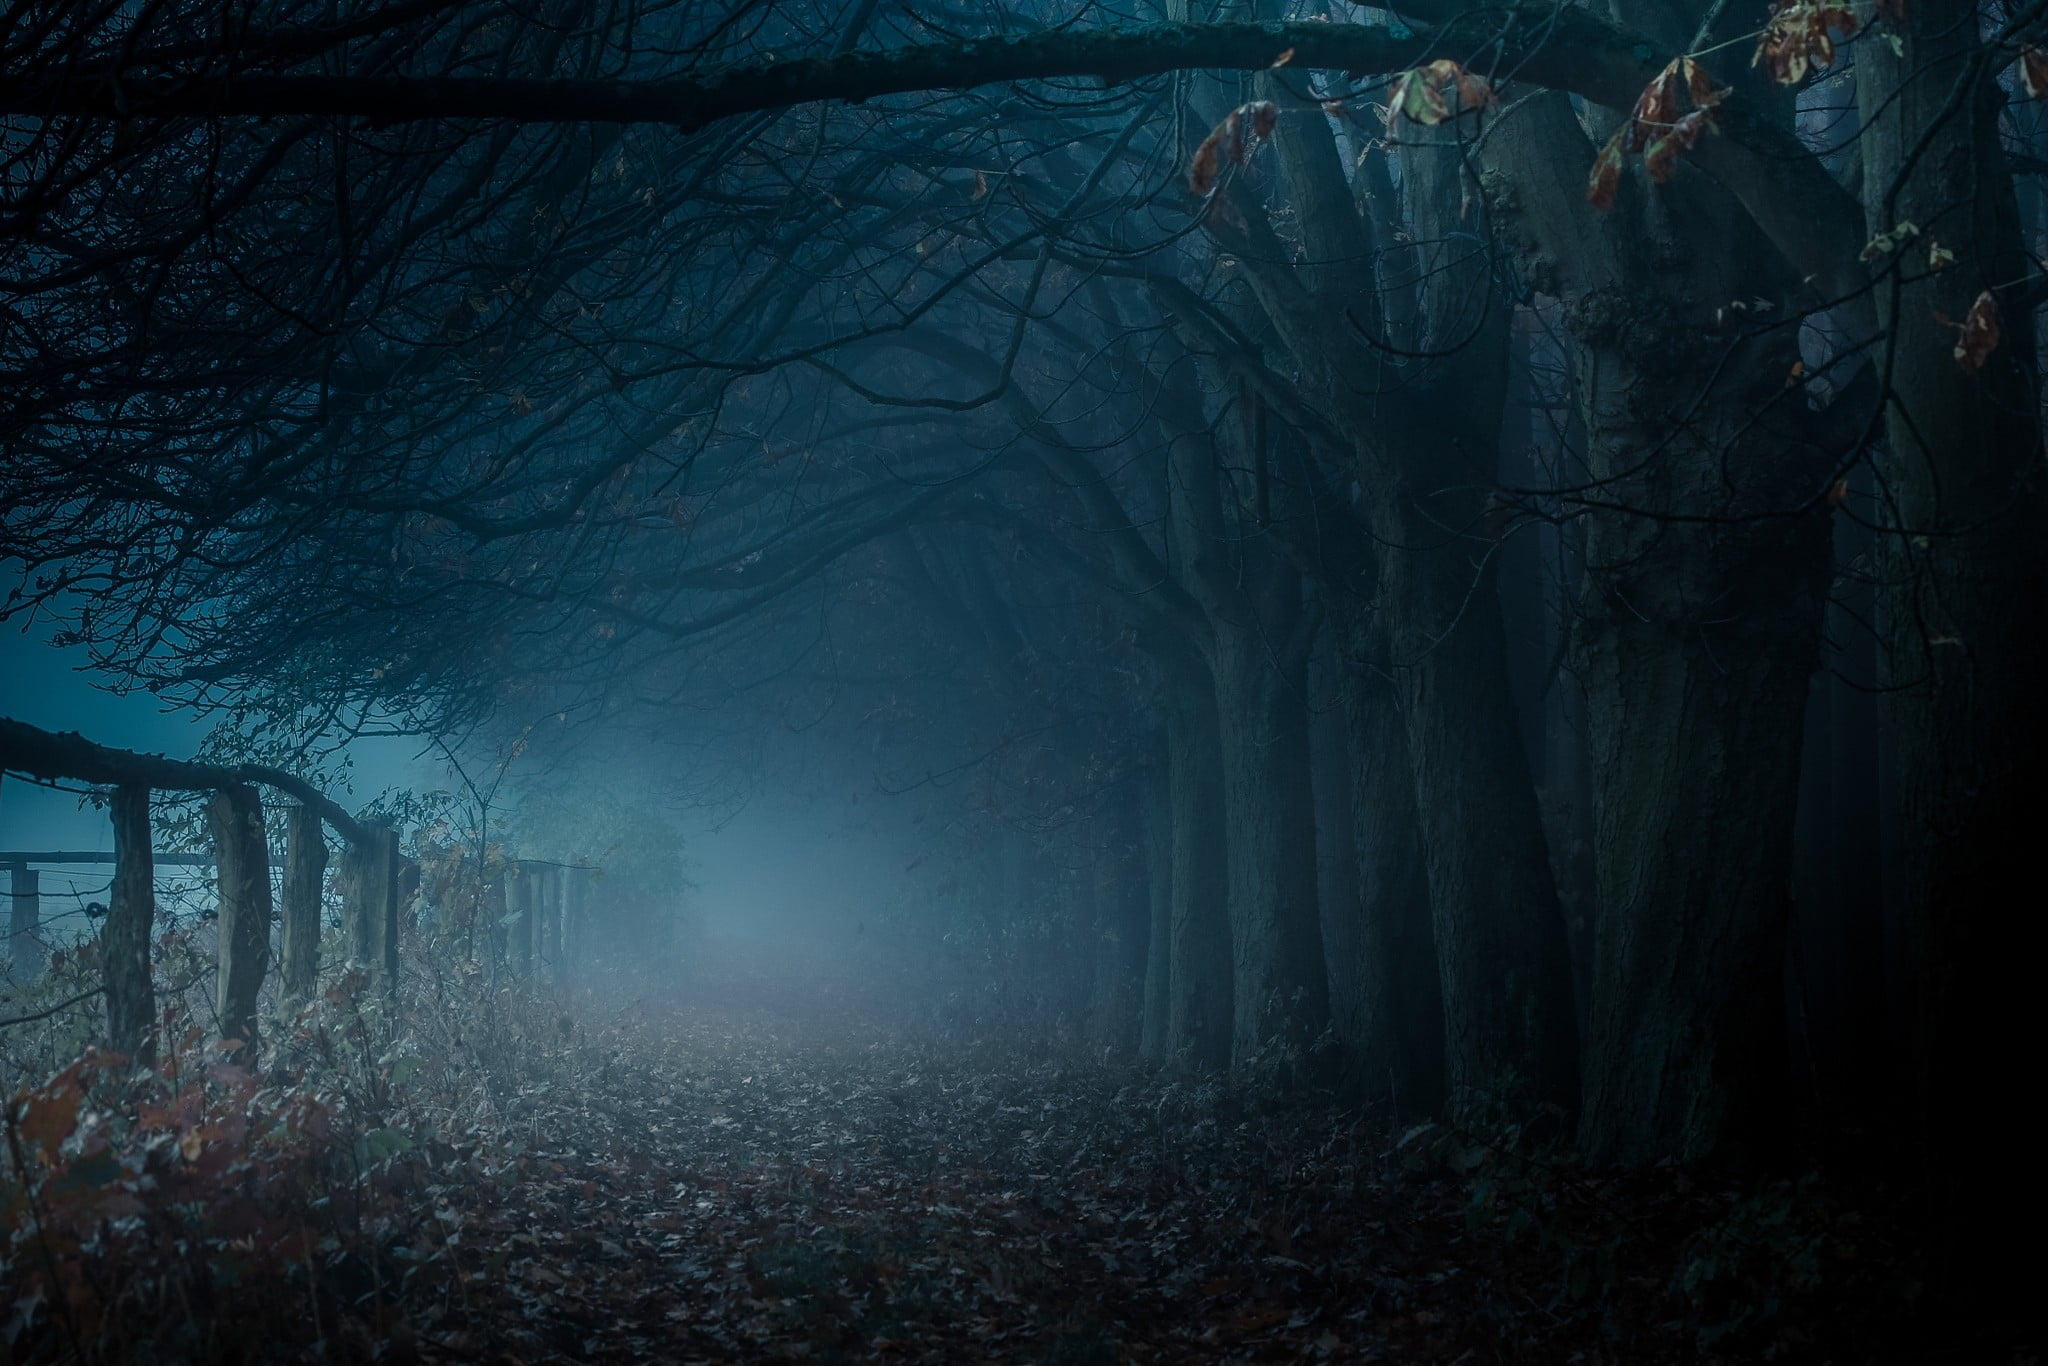 Brown bare trees, dark pathway with dead trees and fog, mist